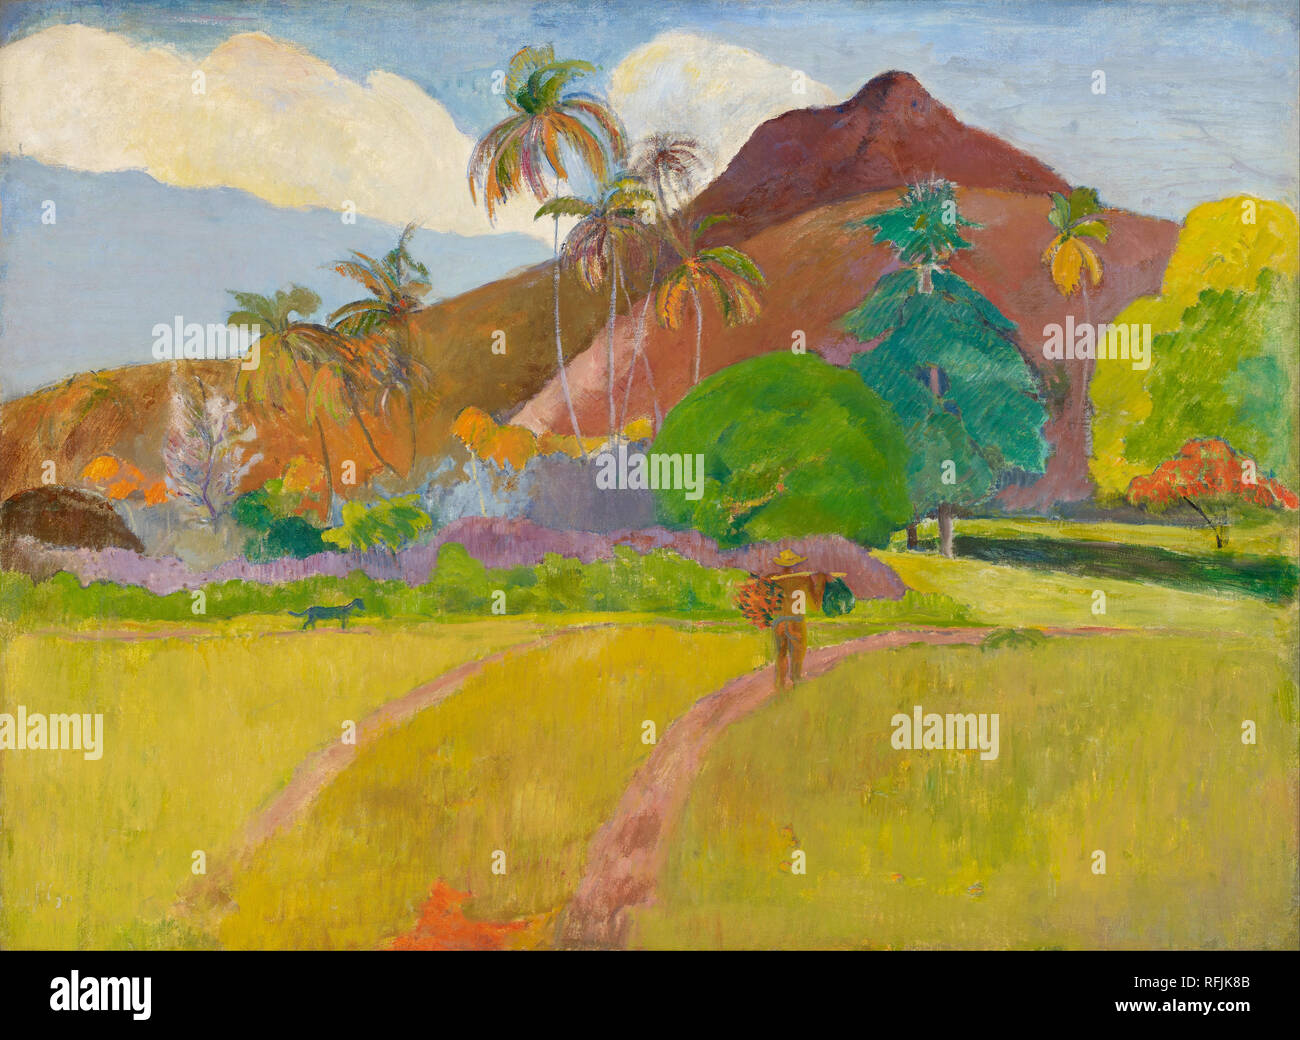 Montagnes tahitiennes / Tahitian Landscape. Date/Period: 1891. Painting. Oil on canvas. Height: 67.9 cm (26.7 in); Width: 92.3 cm (36.3 in). Author: PAUL GAUGUIN. GAUGUIN, PAUL. Stock Photo